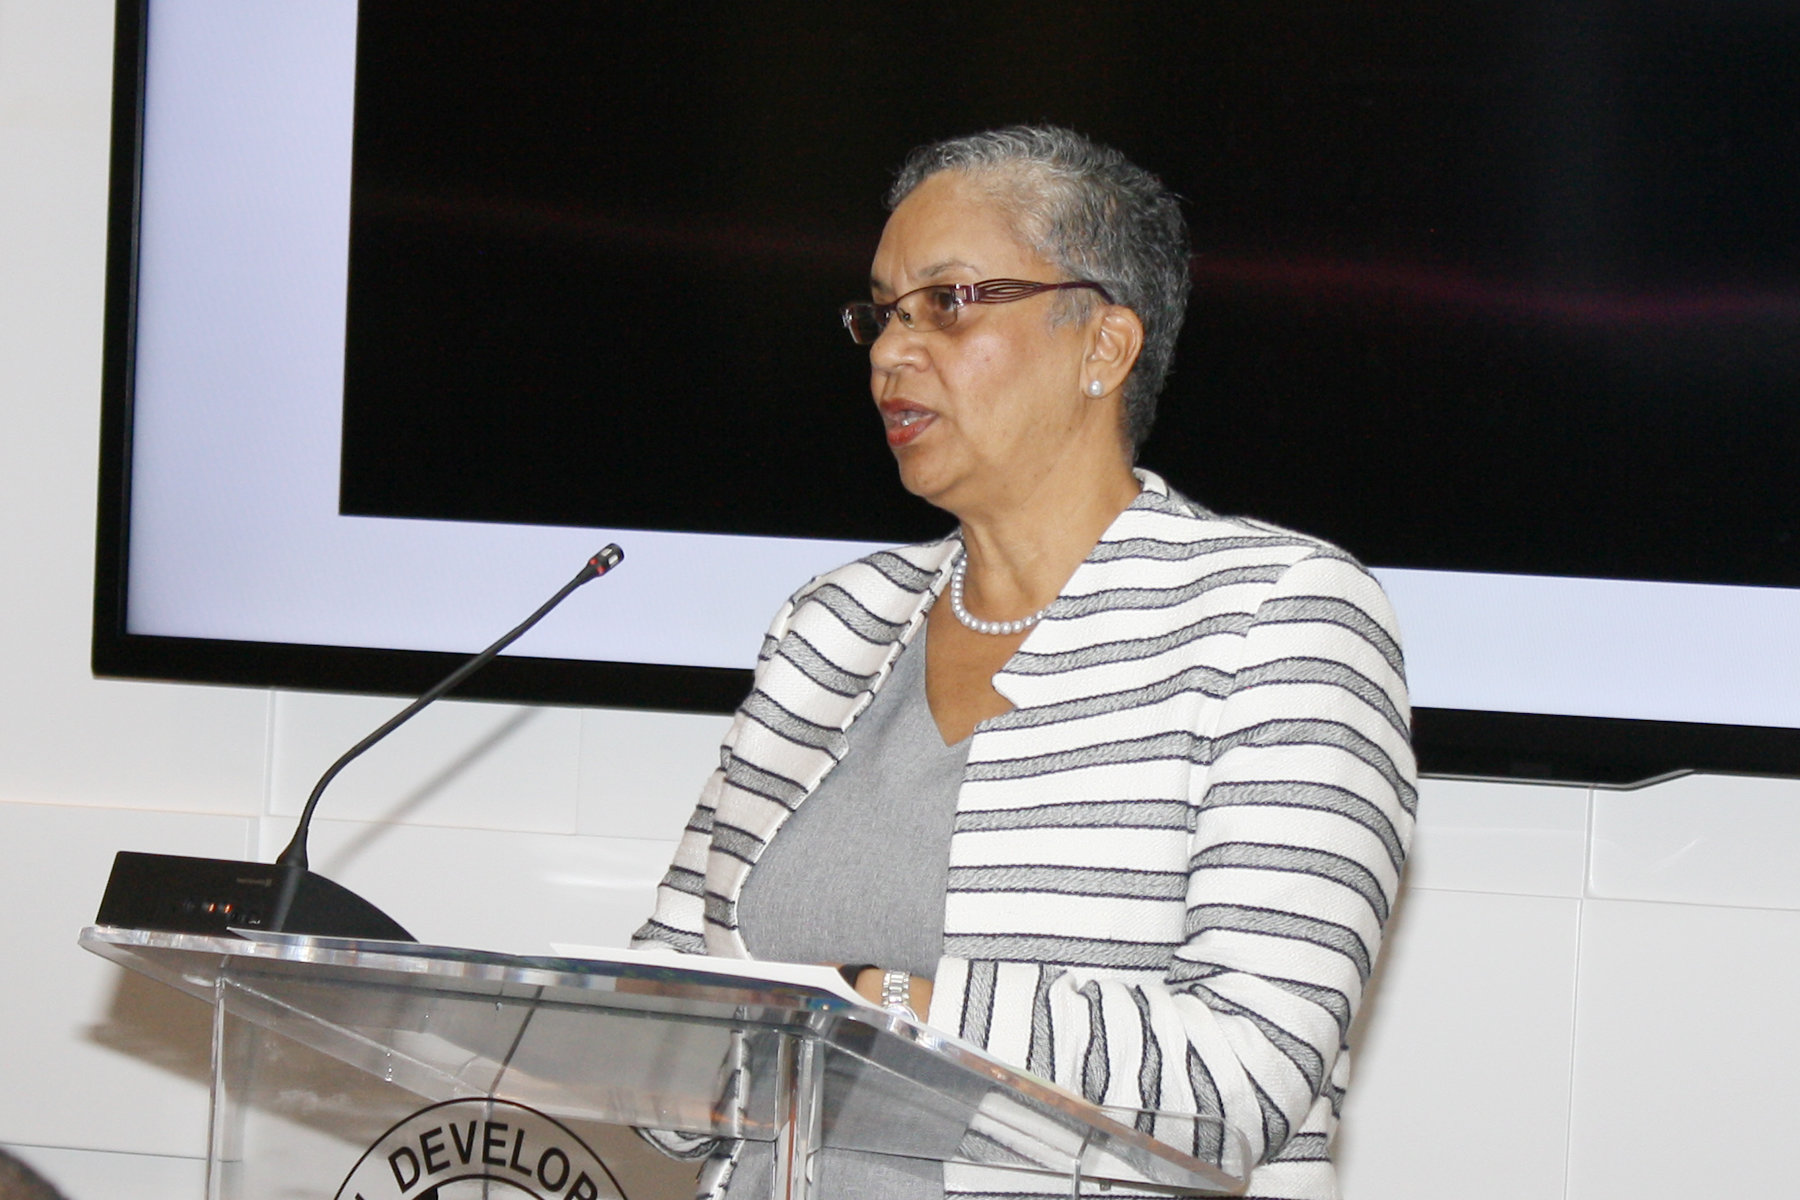 Monica La Bennett, Vice President, Operations (VPO), CDB, speaking during the opening of the Adaptation Fund seminar.